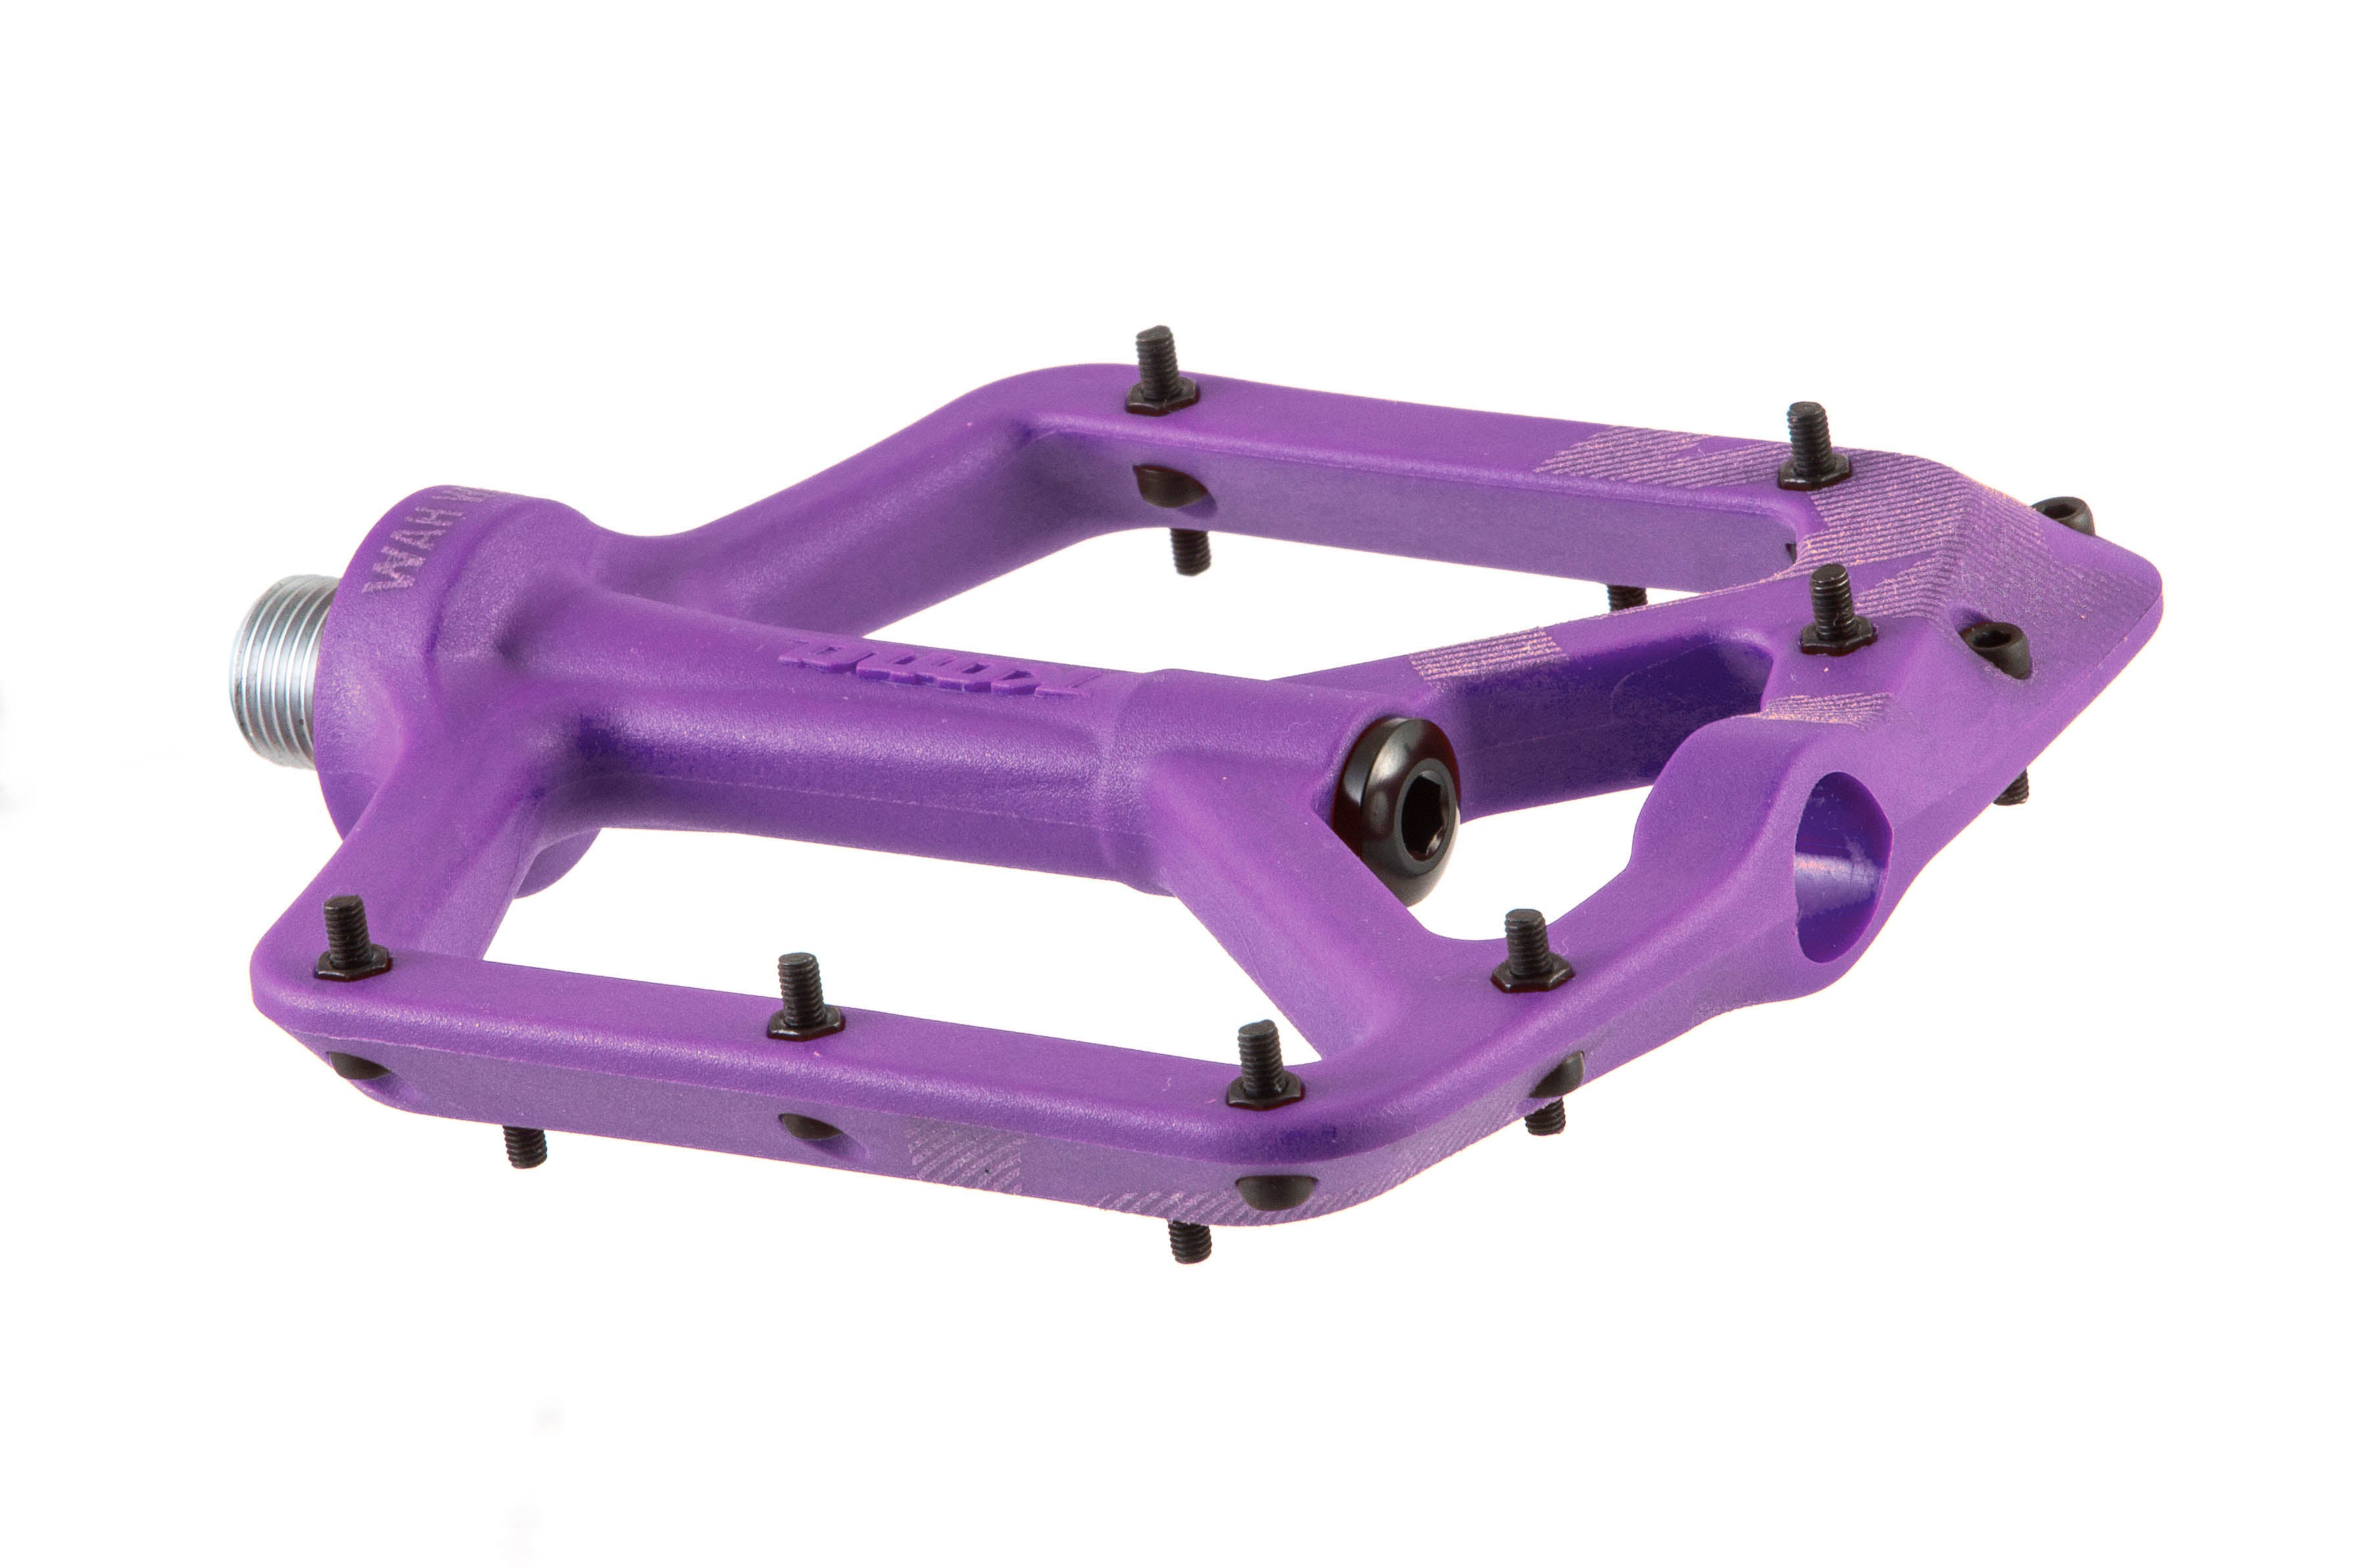 Kona Wah Wah 2 Composite Flat Pedals – On Your Mark Performance 